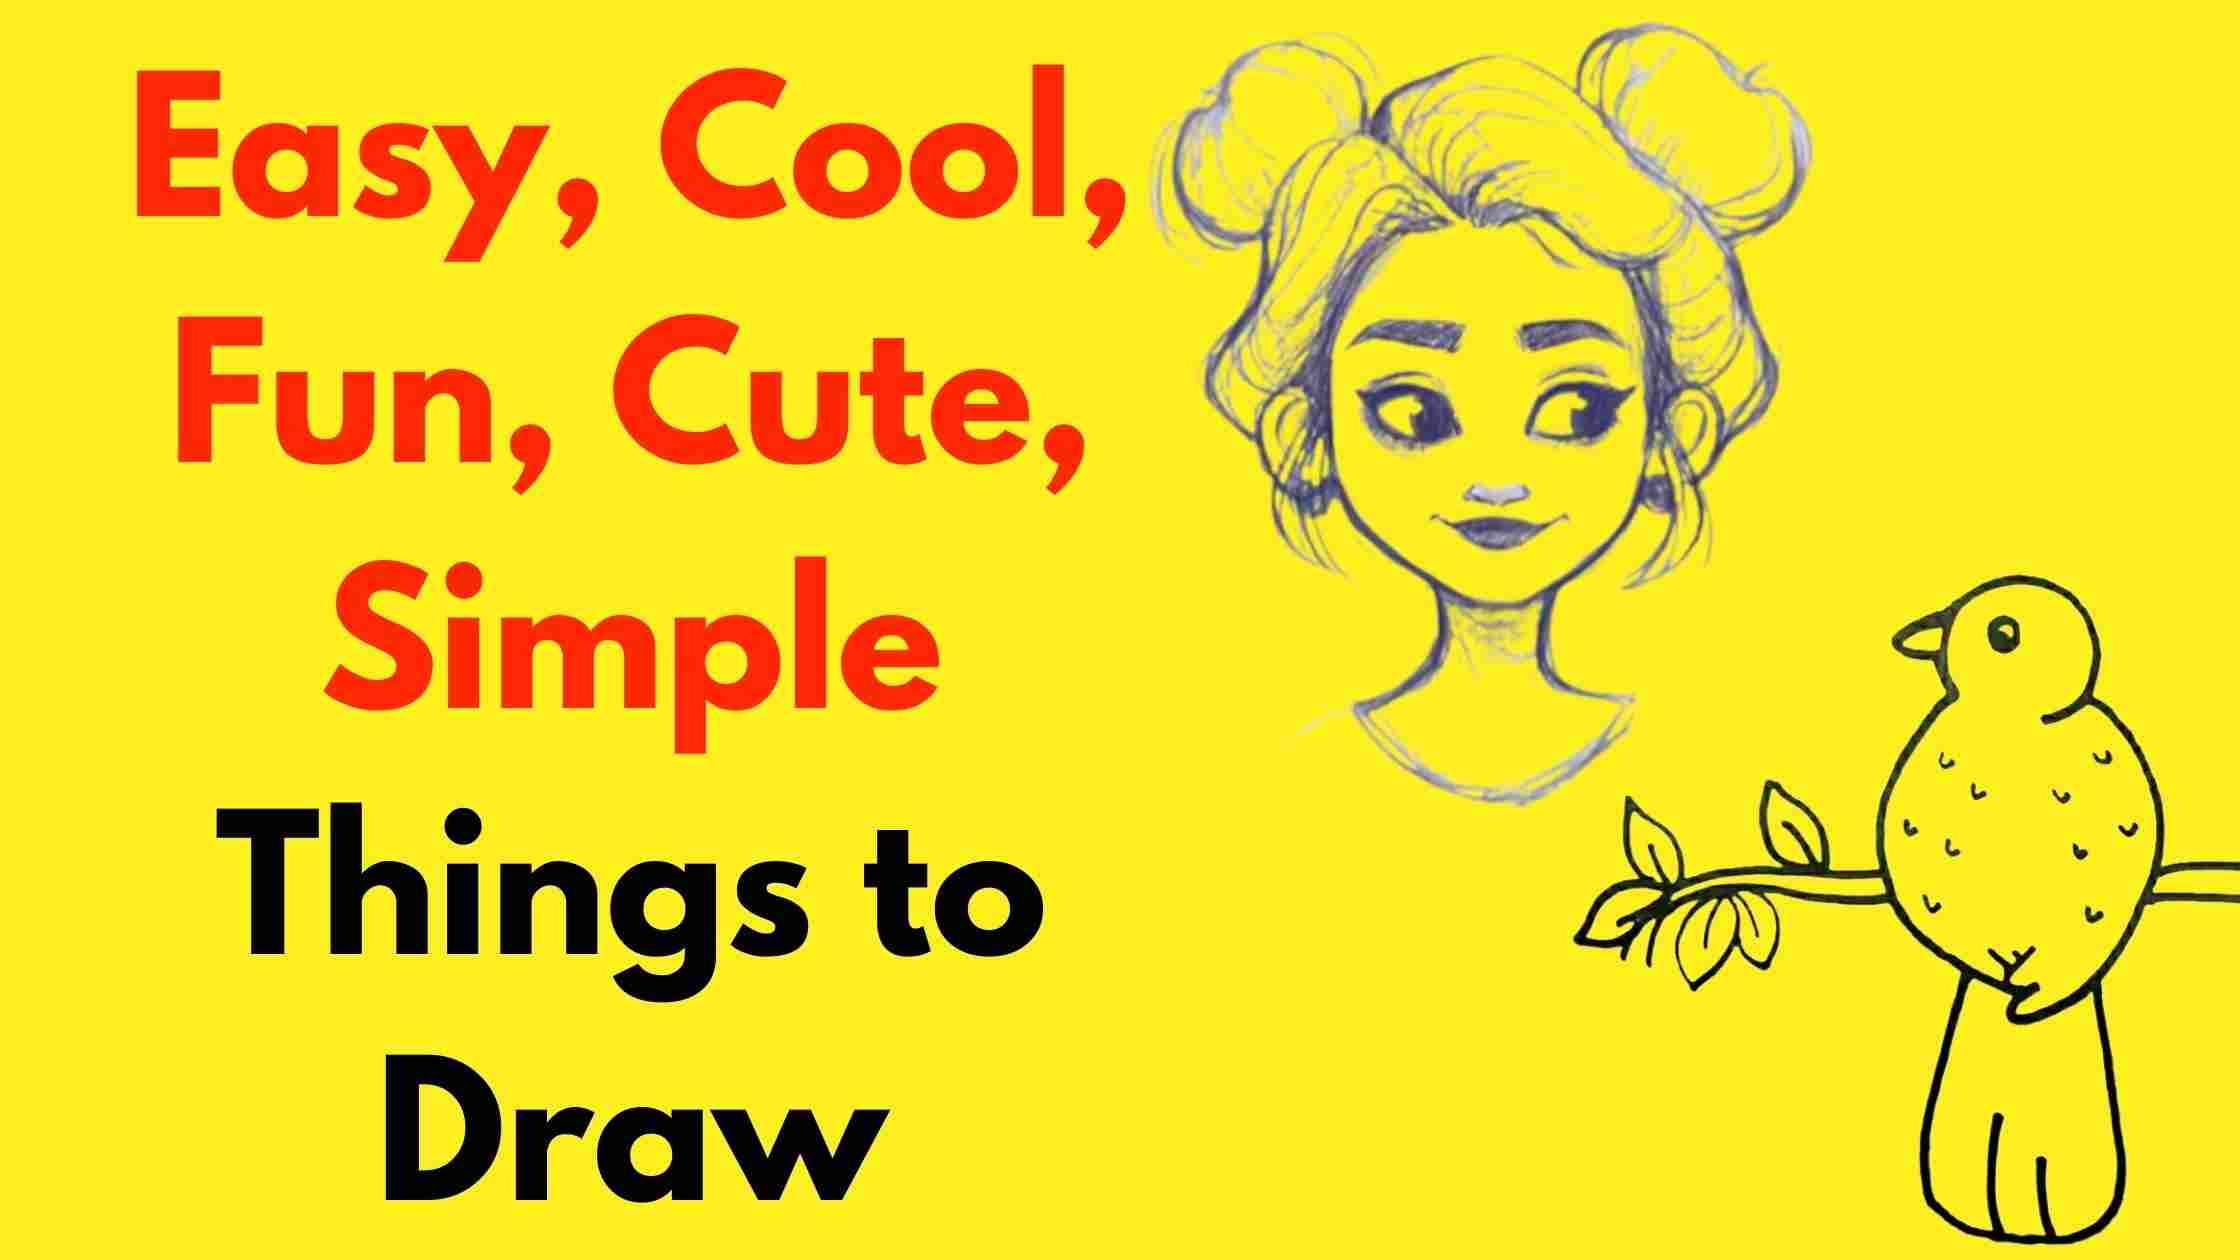 Simple Things to Draw